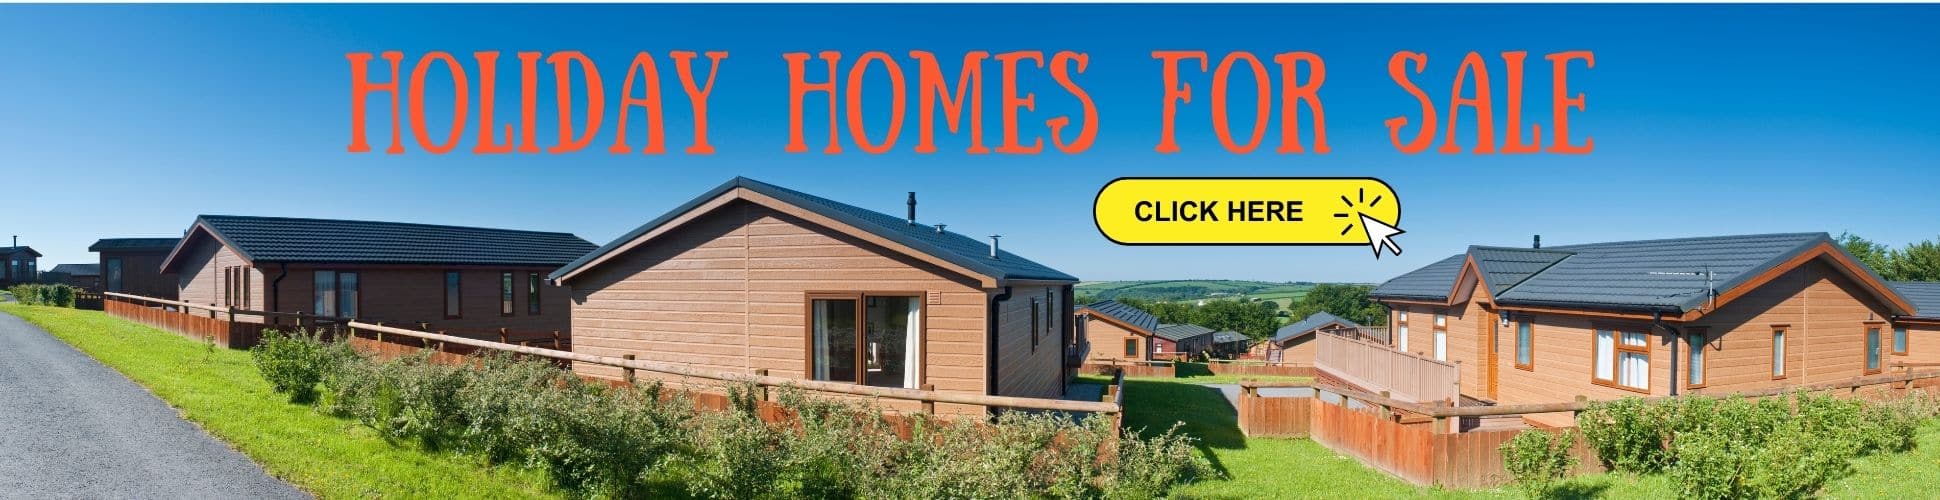 holiday homes for sale